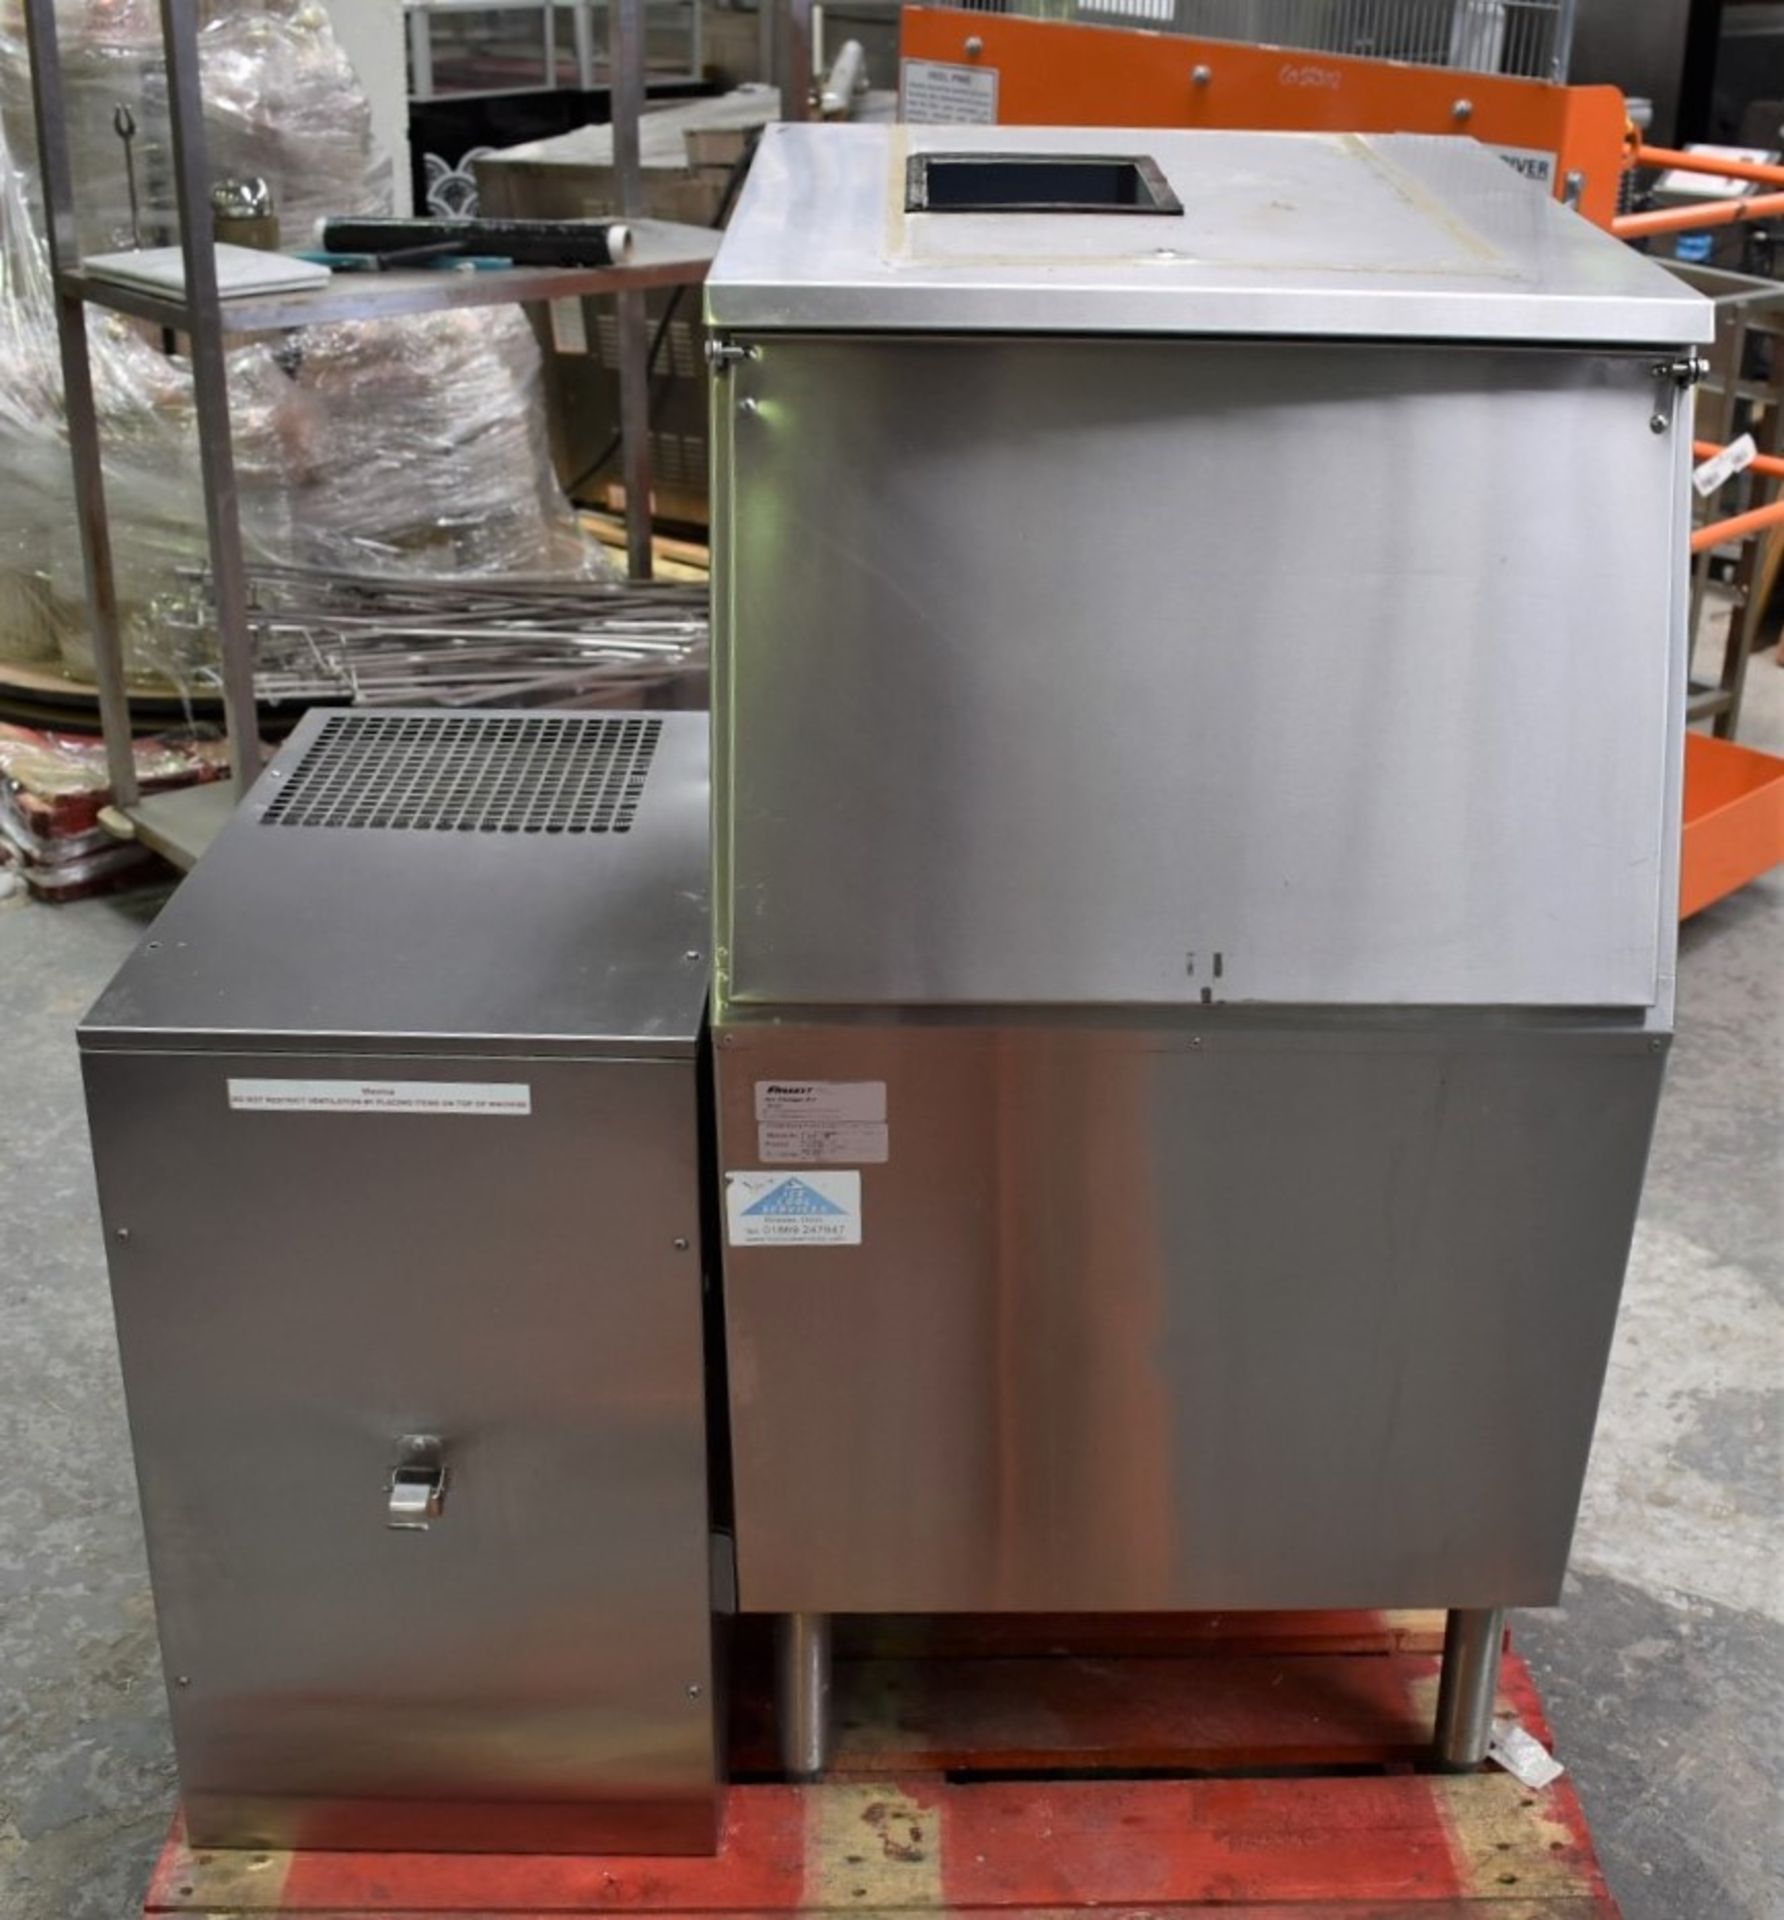 1 x Follet Commercial Ice Machine With WCF712 Flaker Head and Ice Storage Bin - 240v UK Plug - Image 8 of 10